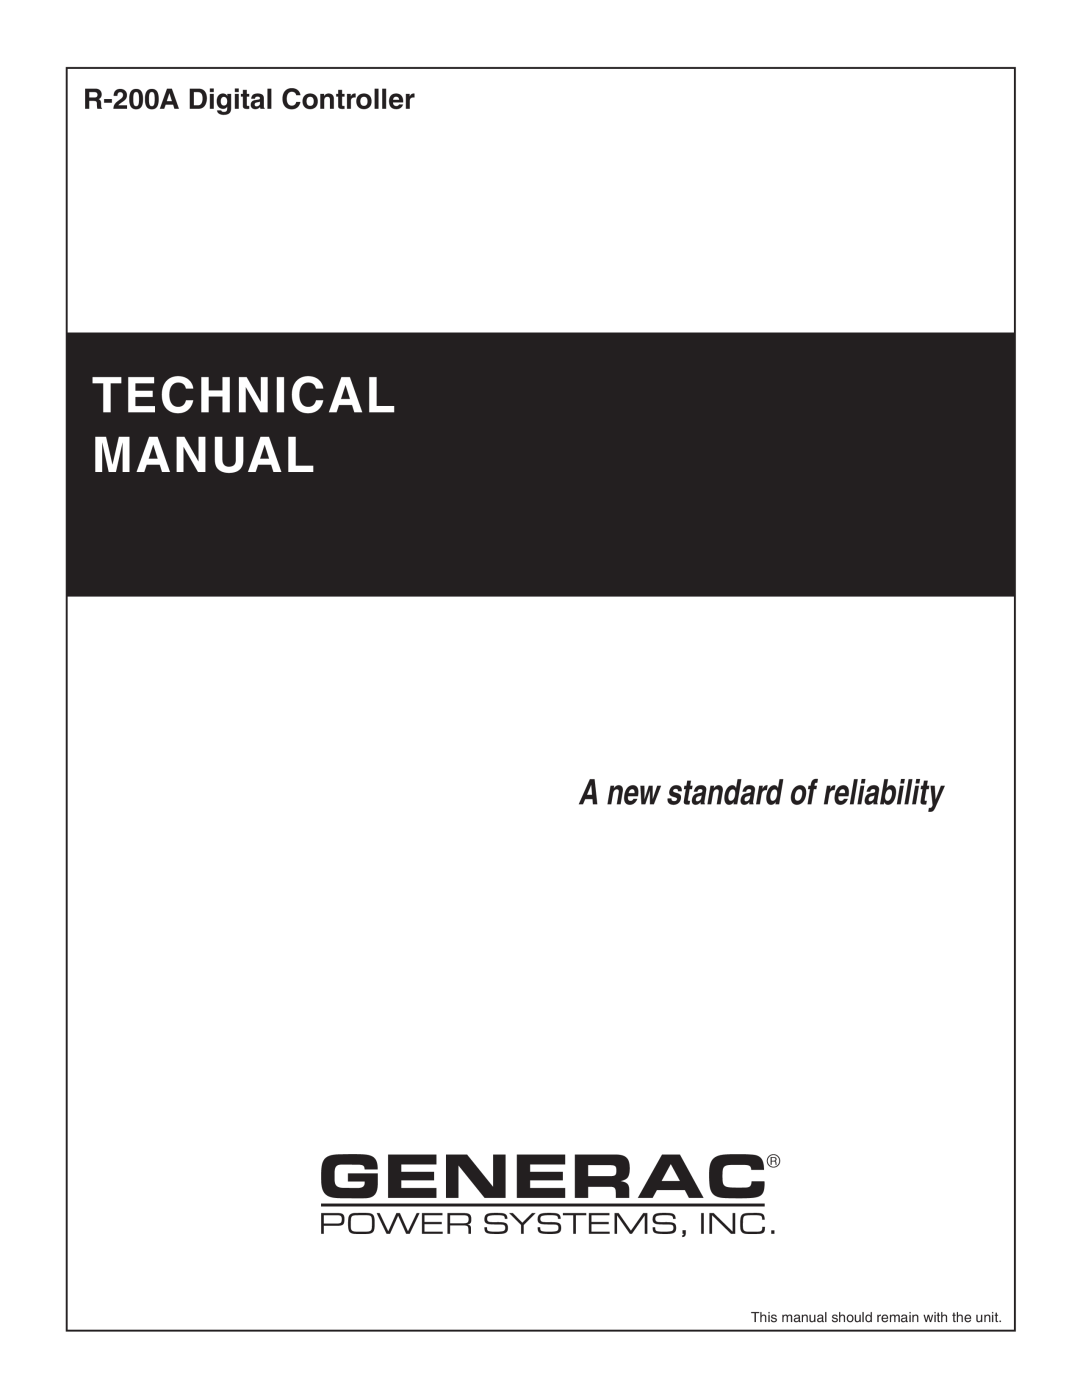 Generac Power Systems technical manual Technical Manual, A new standard of reliability, R-200A Digital Controller 